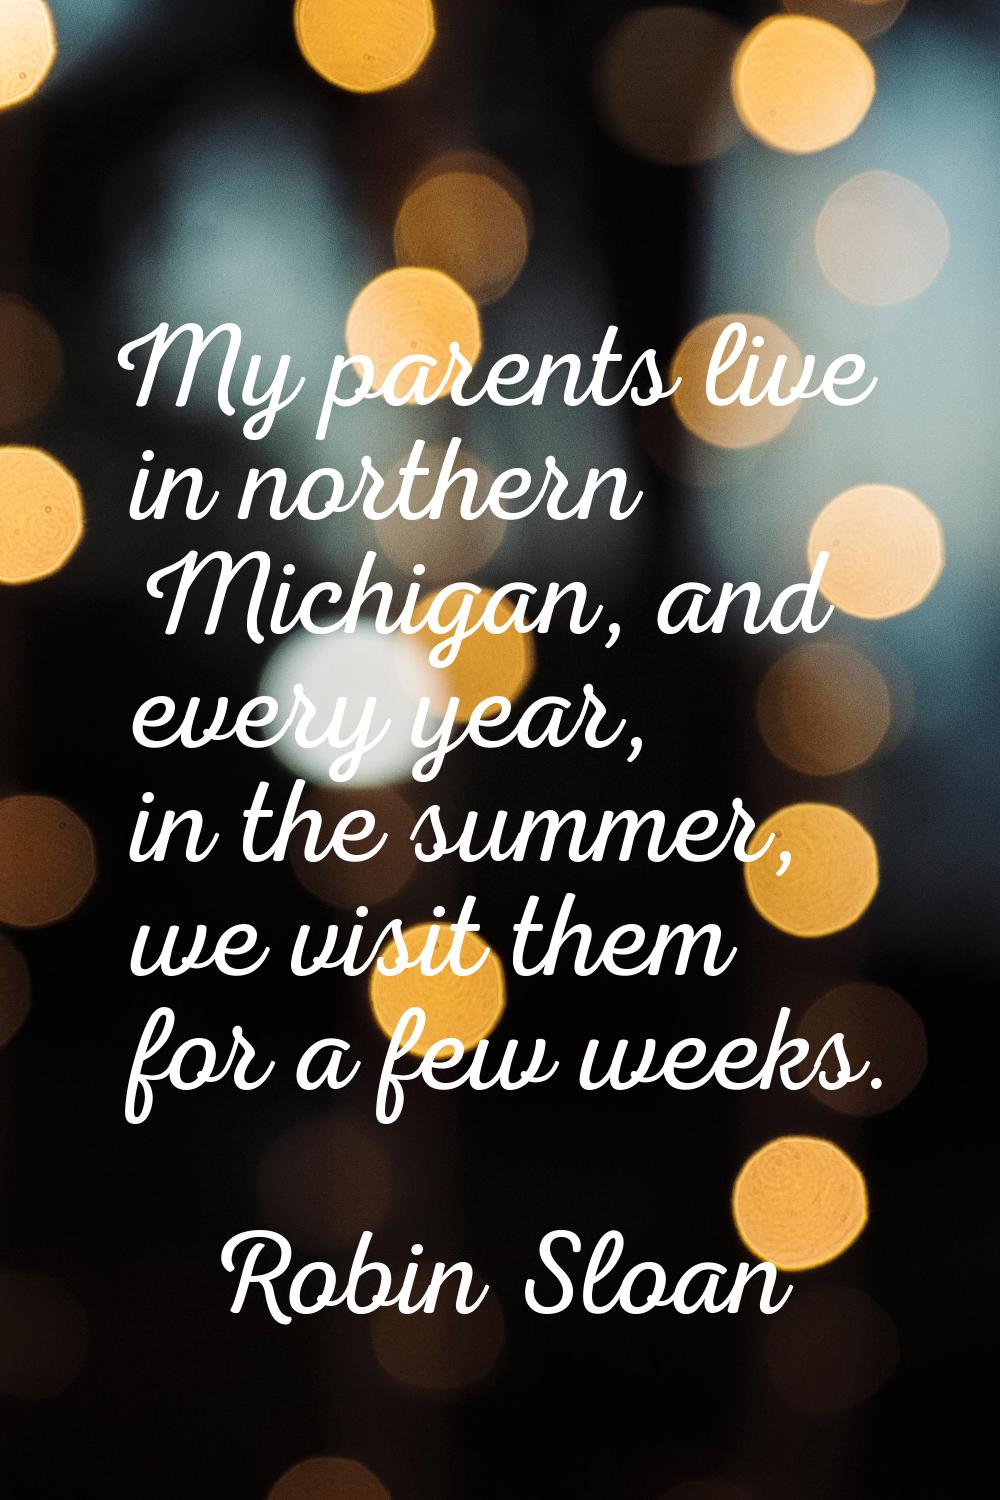 My parents live in northern Michigan, and every year, in the summer, we visit them for a few weeks.